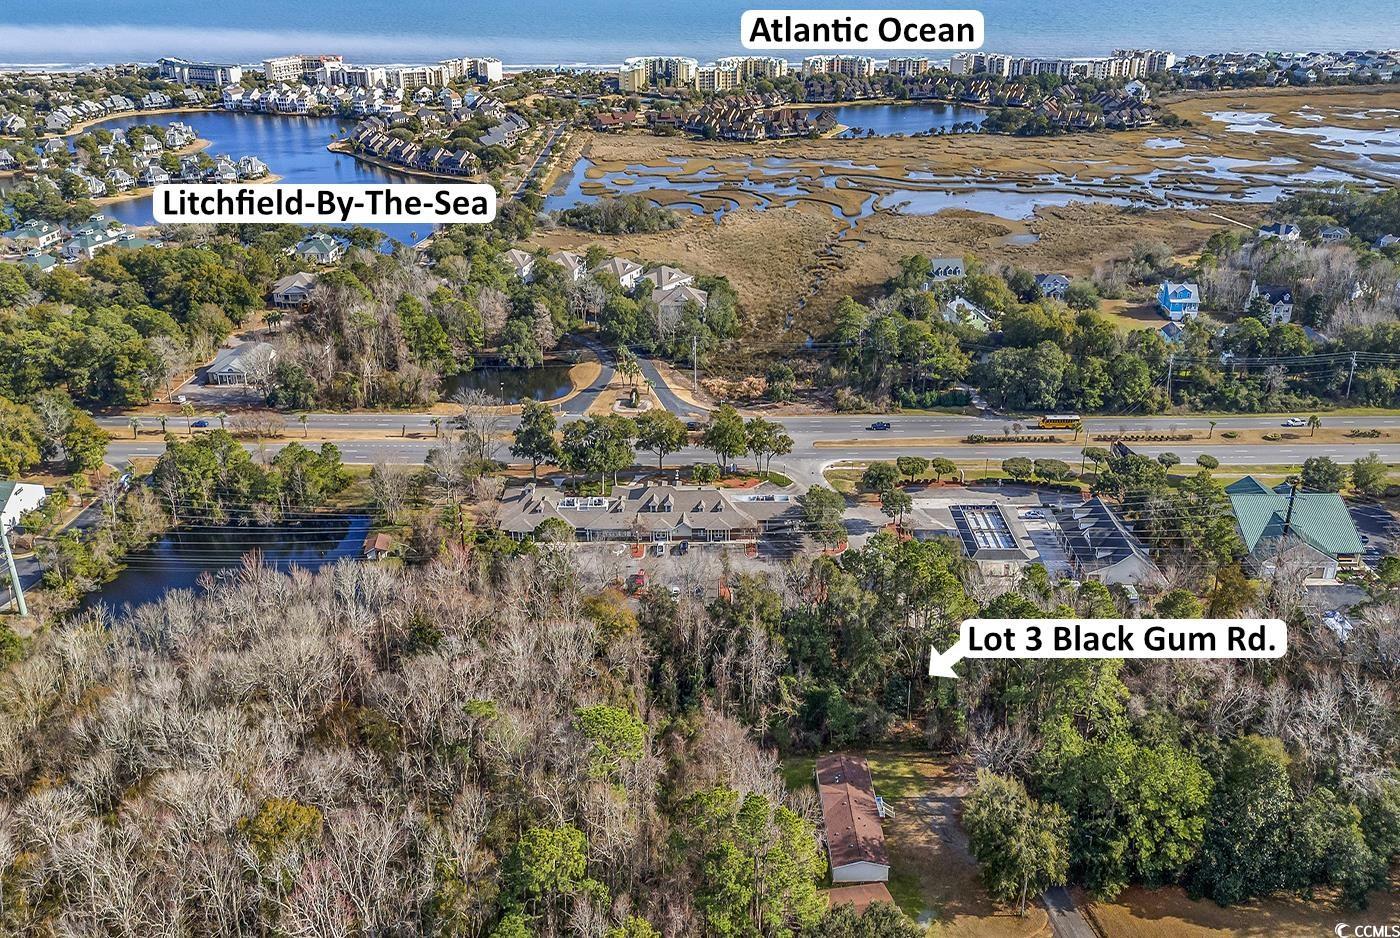 highly sought-after acreage, with no hoa fees, the parcel uniquely located within close proximity to litchfield-by-the-sea and litchfield beaches. this large lot provides ample opportunity for development or the building of your dream home on a large homestead! with so few vacant properties available in pawleys island, this lot will certainly capture quite a bit of attention. perfectly situated near the shops at litchfield market village, the lot’s location is convenient to all this beautiful area has to offer including: legendary golf courses, an abundance of incredible restaurants, unique shops and a large selection of water/leisure activities including boating/fishing in both fresh & saltwater ~as well as miles of gorgeous ocean beach to explore and enjoy!